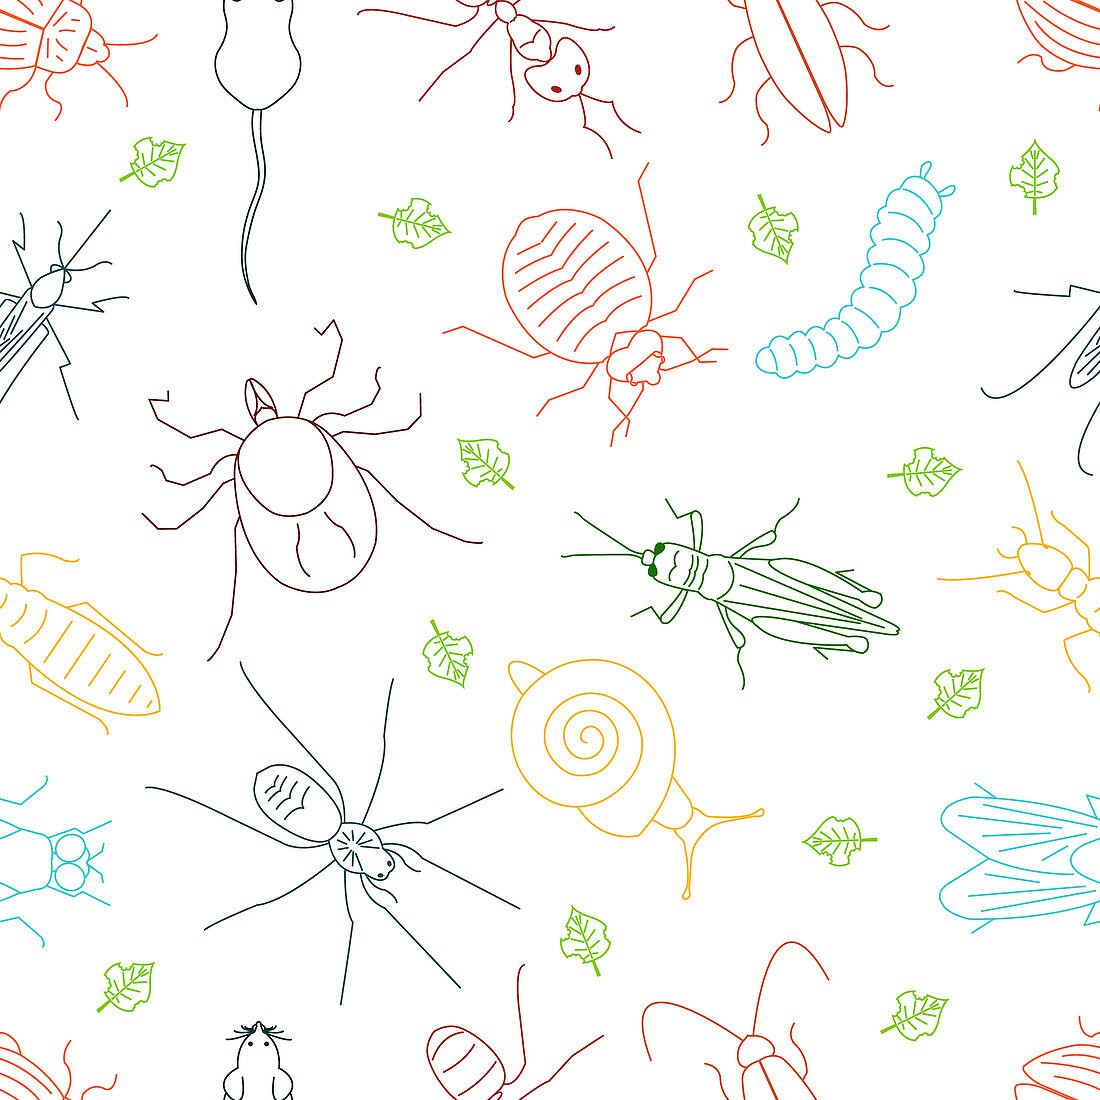 Pest insects, conceptual illustration